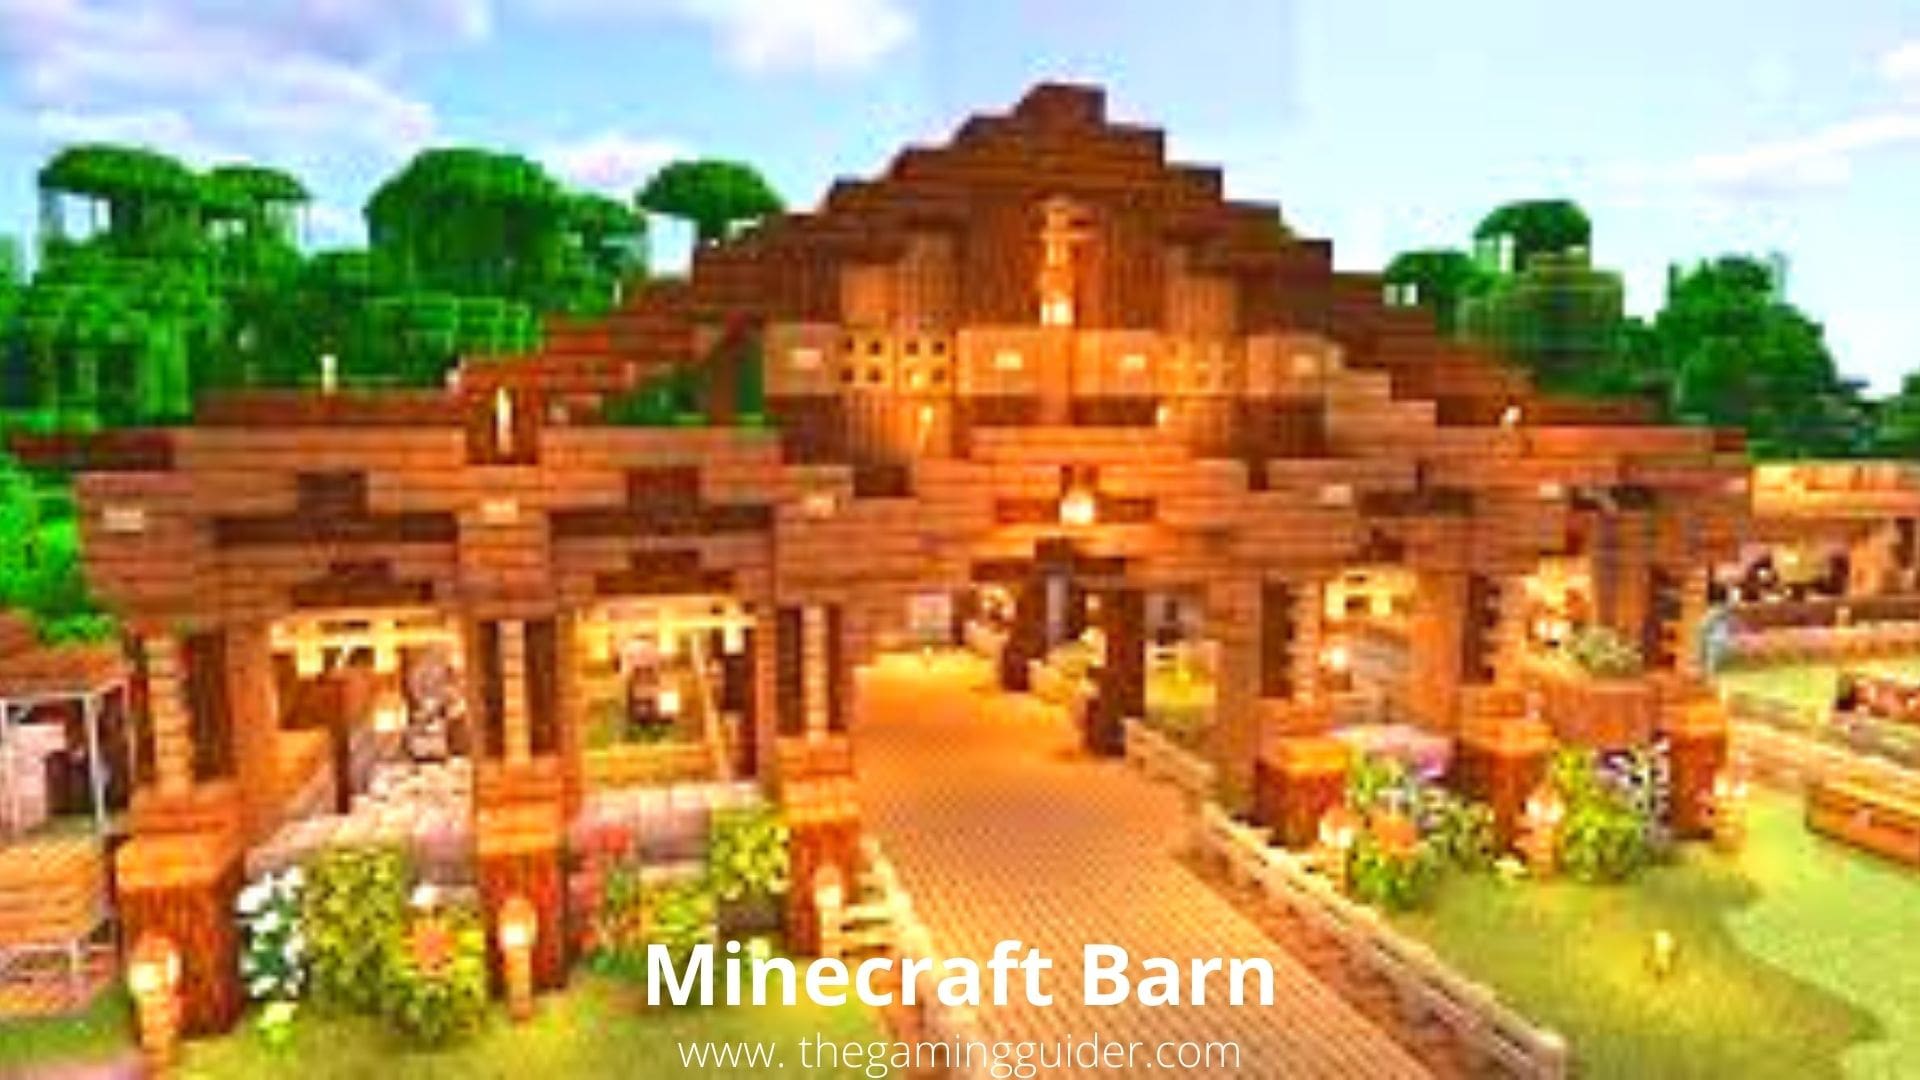 Minecraft Barn - the gaming guider-min (1)